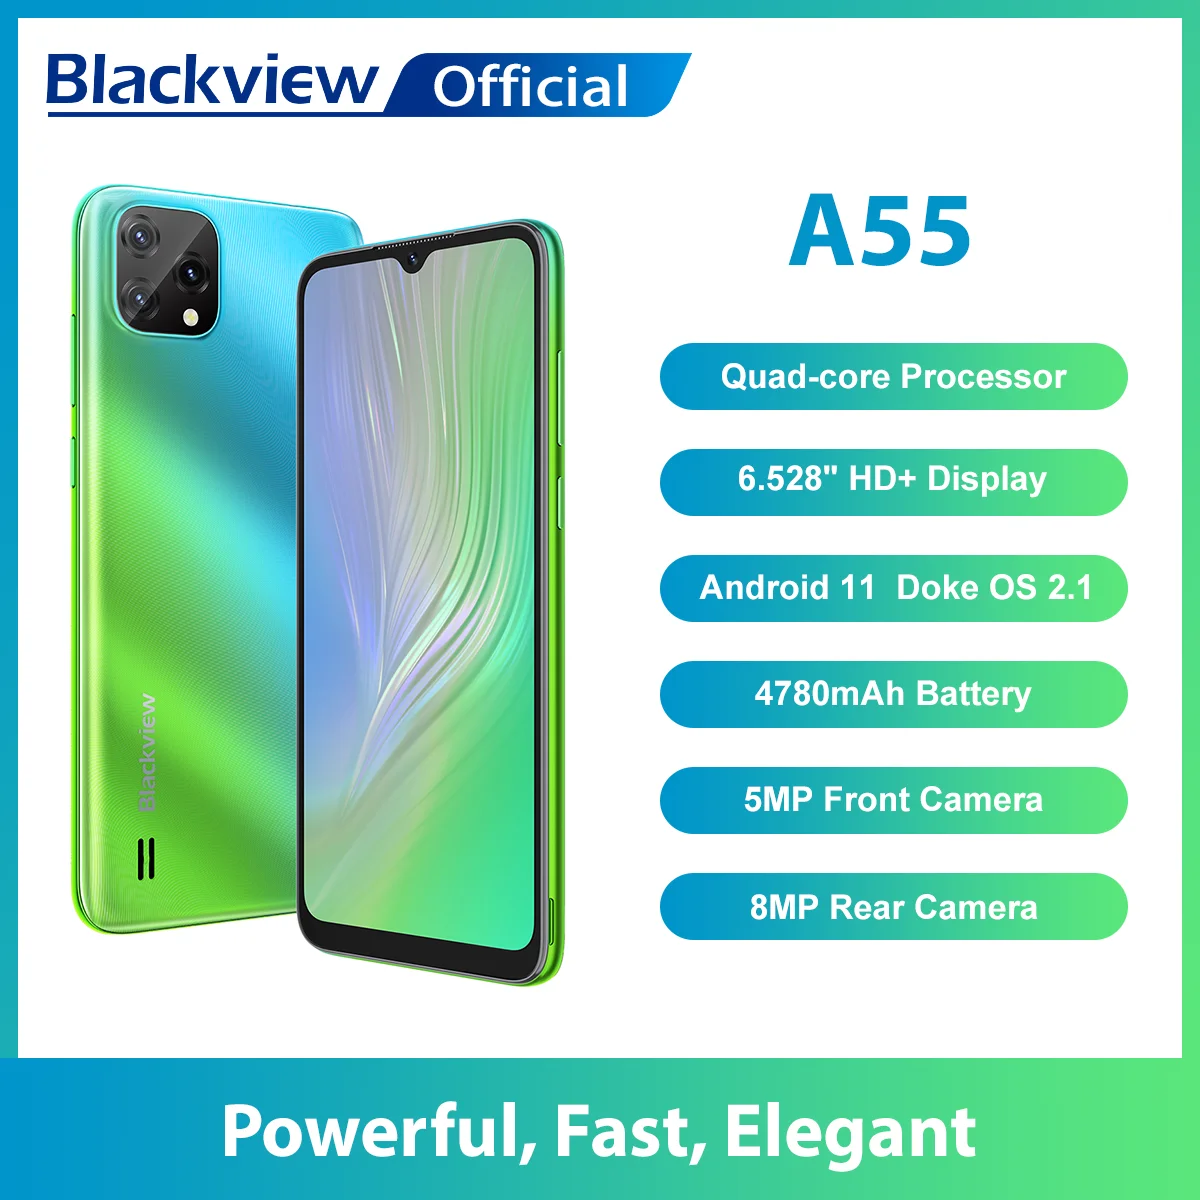 Blackview New A55 Smartphone 3GB 16GB 6.528" HD 4780mAh Quad Core Android11 Mobile Phone MT6761V 5MP+8MP Camera Cell Phone cellphones android